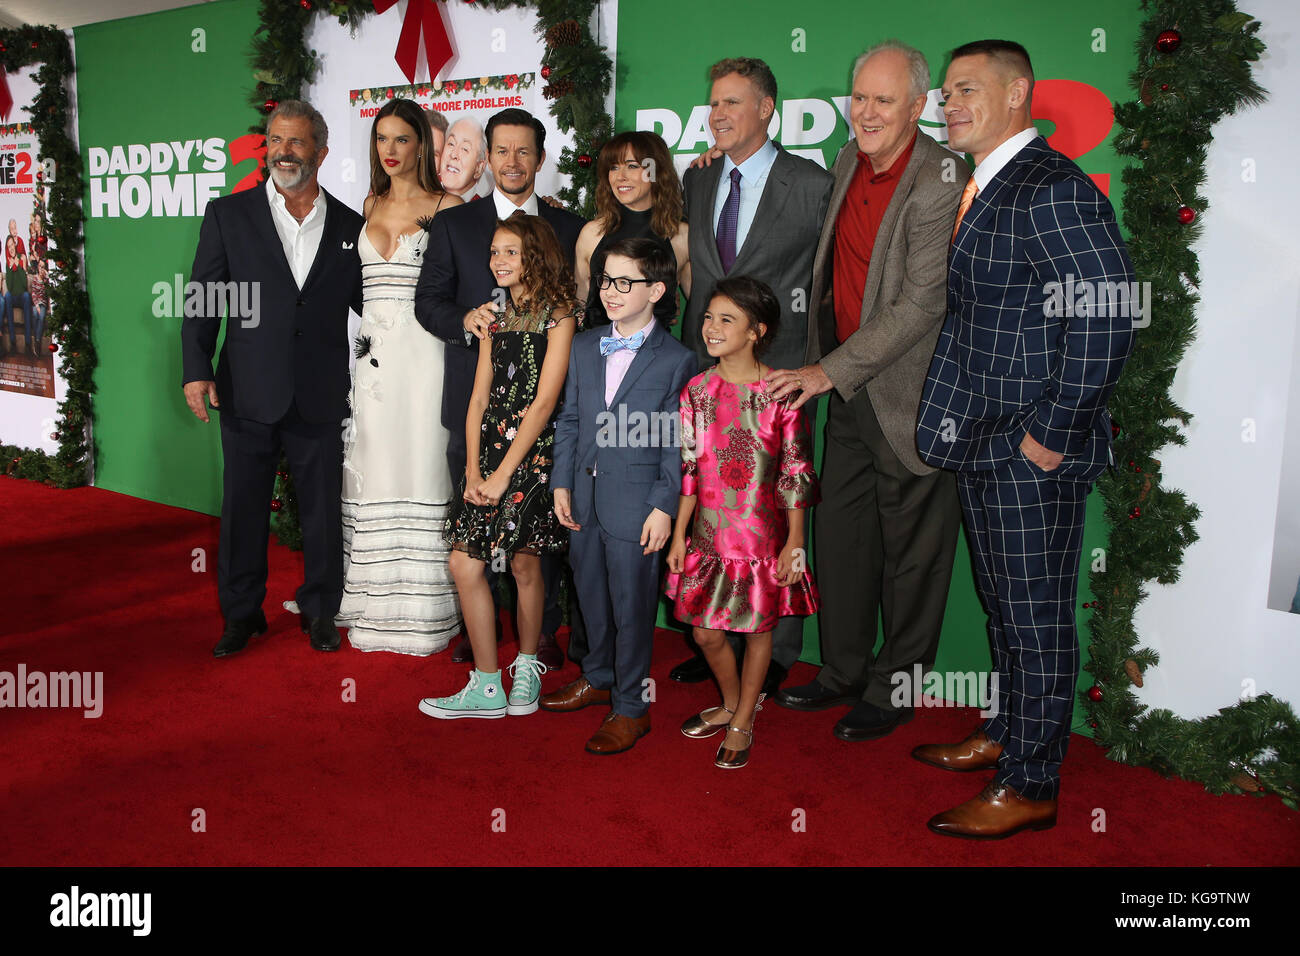 Owen Vaccaro And Scarlett Estevez High Resolution Stock Photography and  Images - Alamy